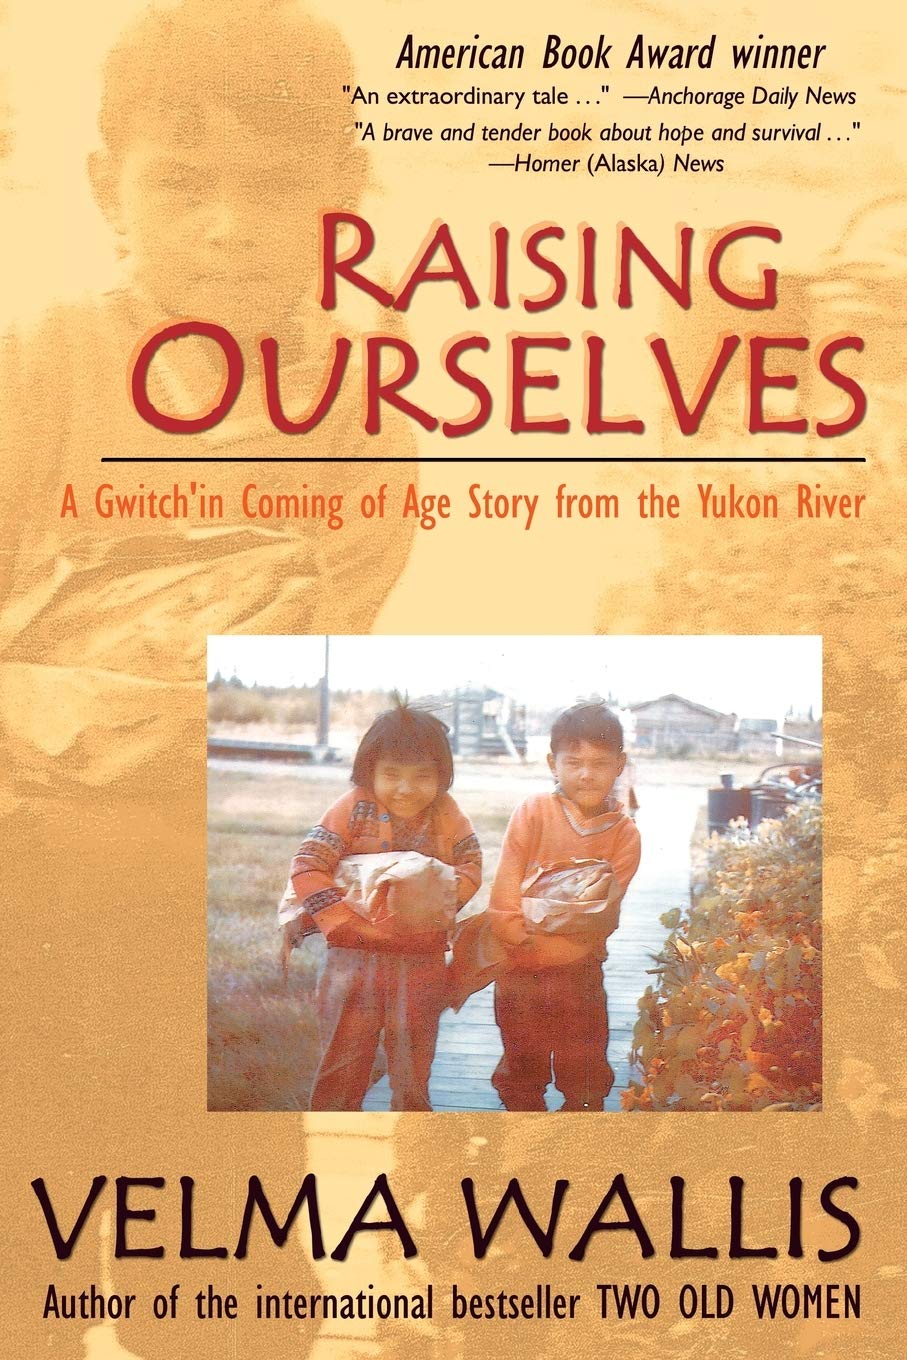 Raising Ourselves: A Gwich'in Coming of Age Story from the Yukon River by Velma Wallis - Softcover